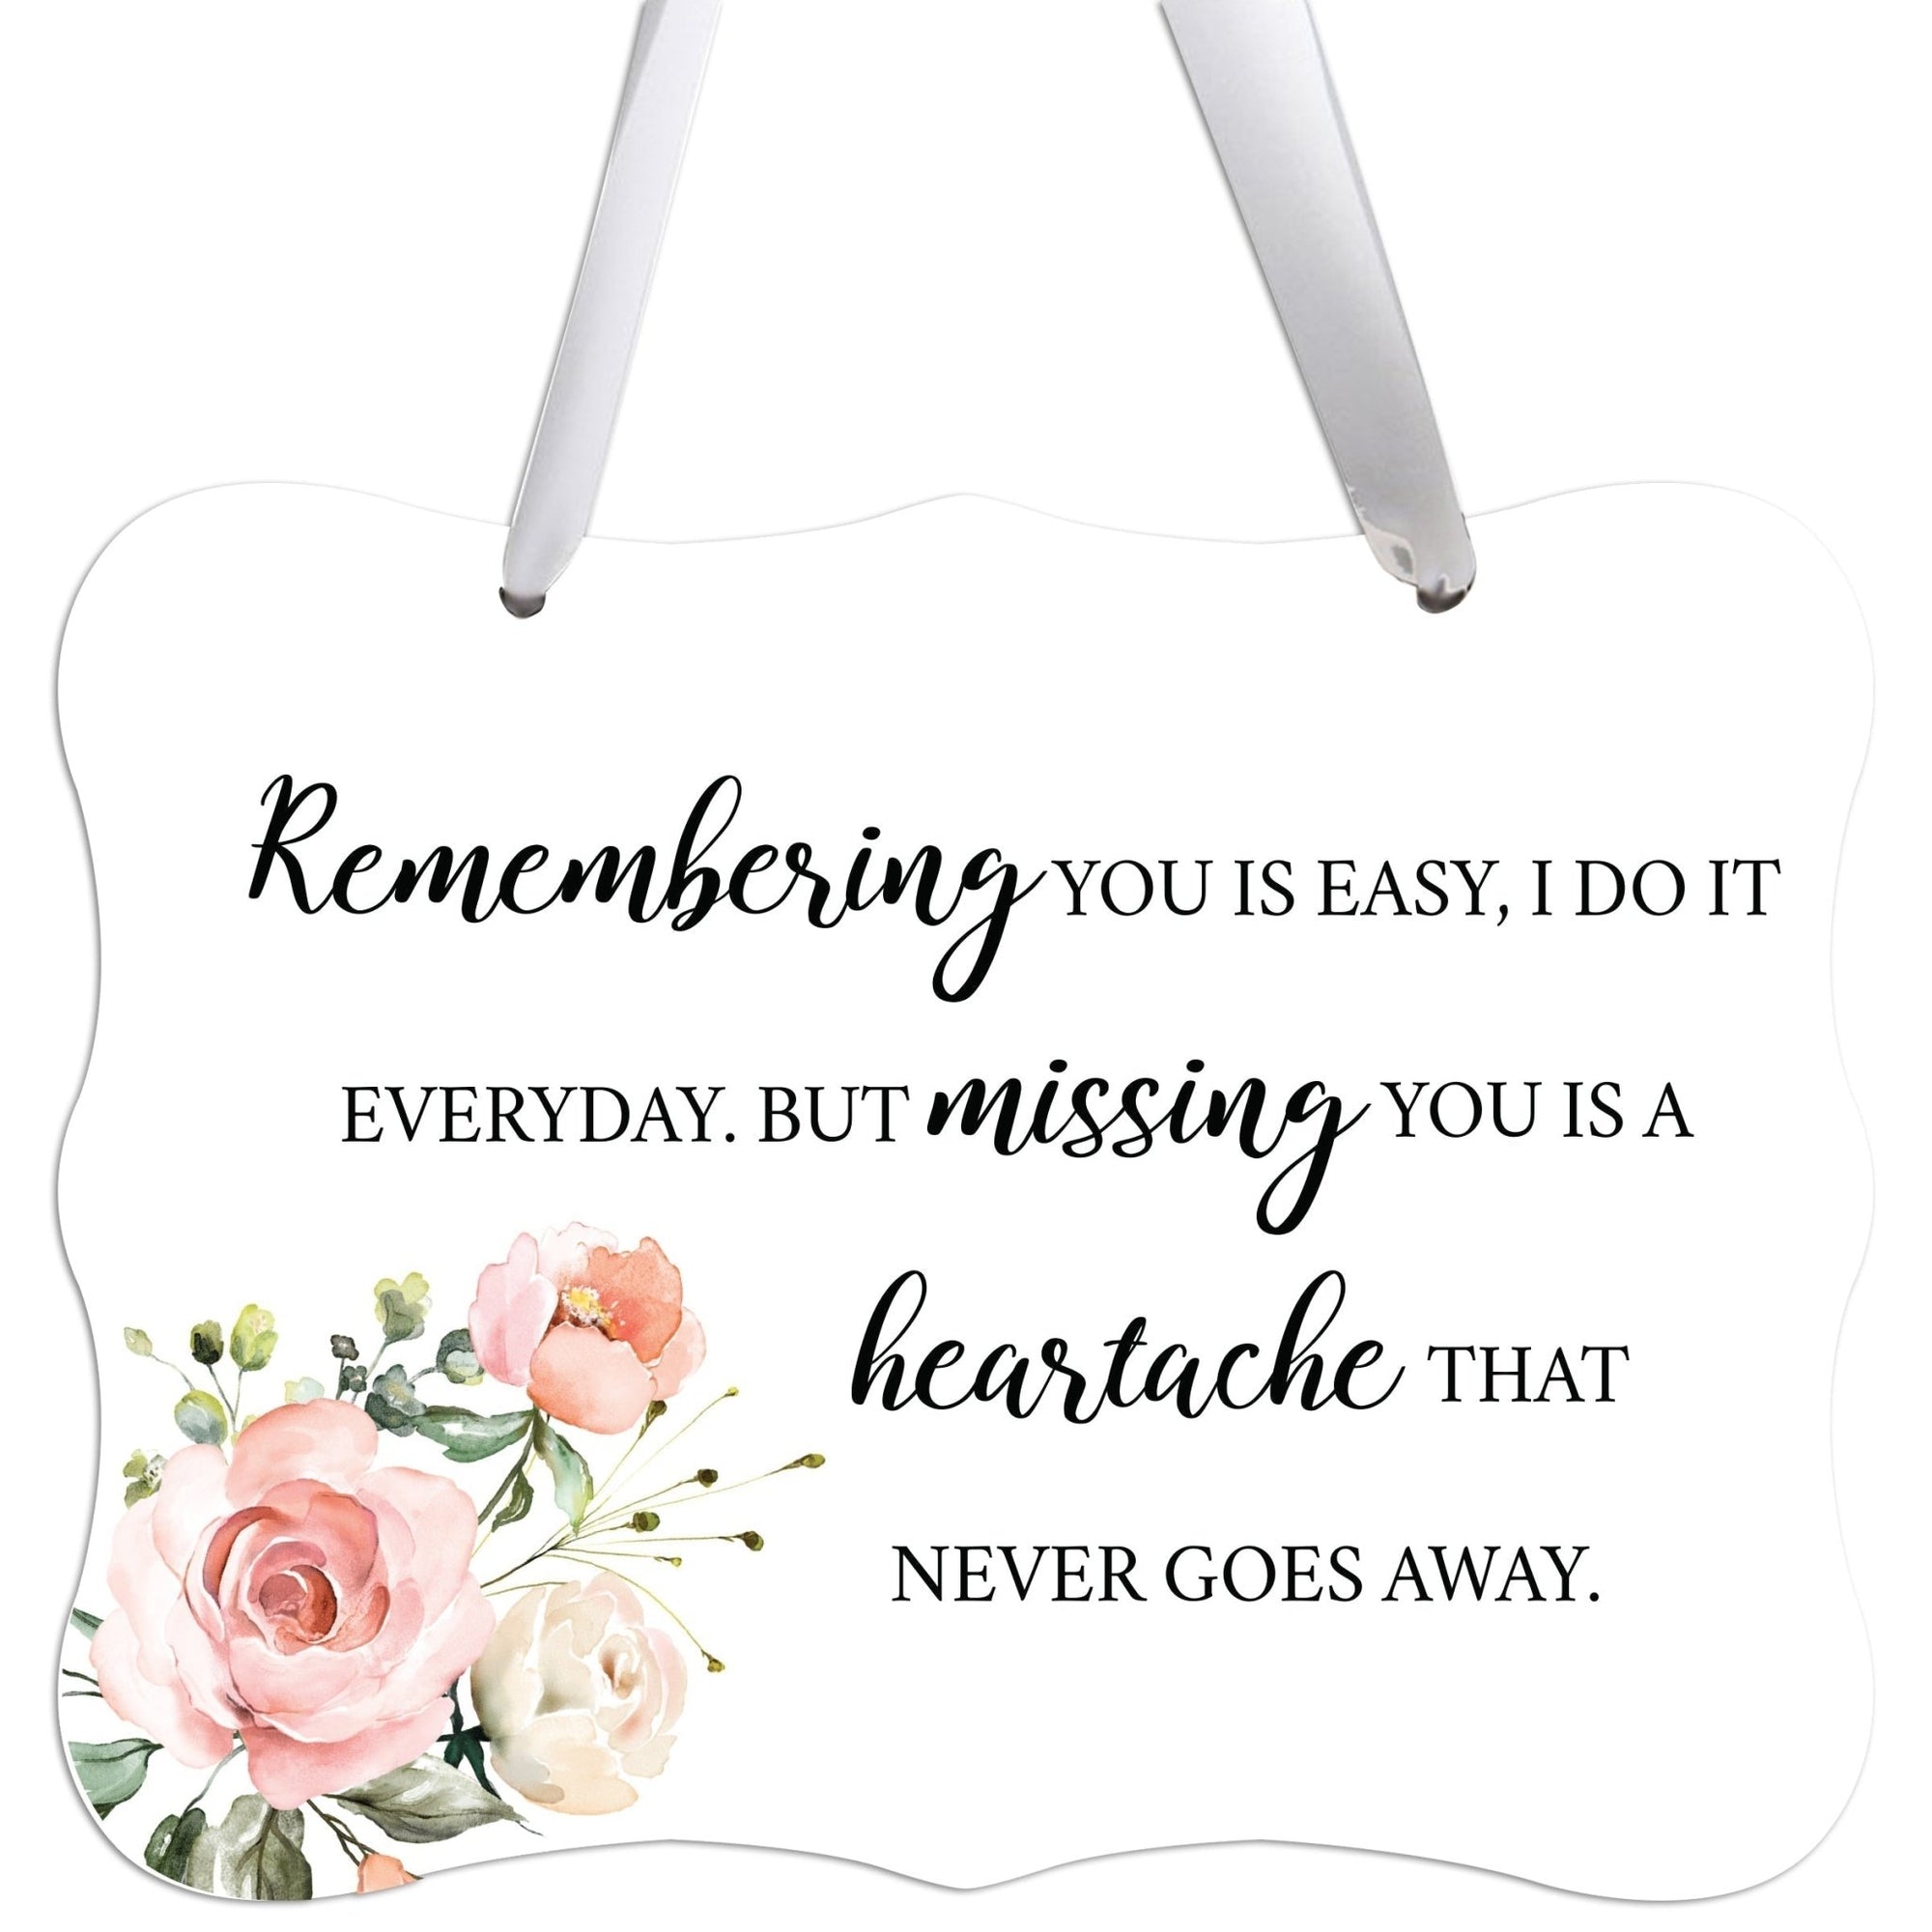 Memorial Hanging Ribbon Wall Decor for Loss of Loved One - LifeSong Milestones